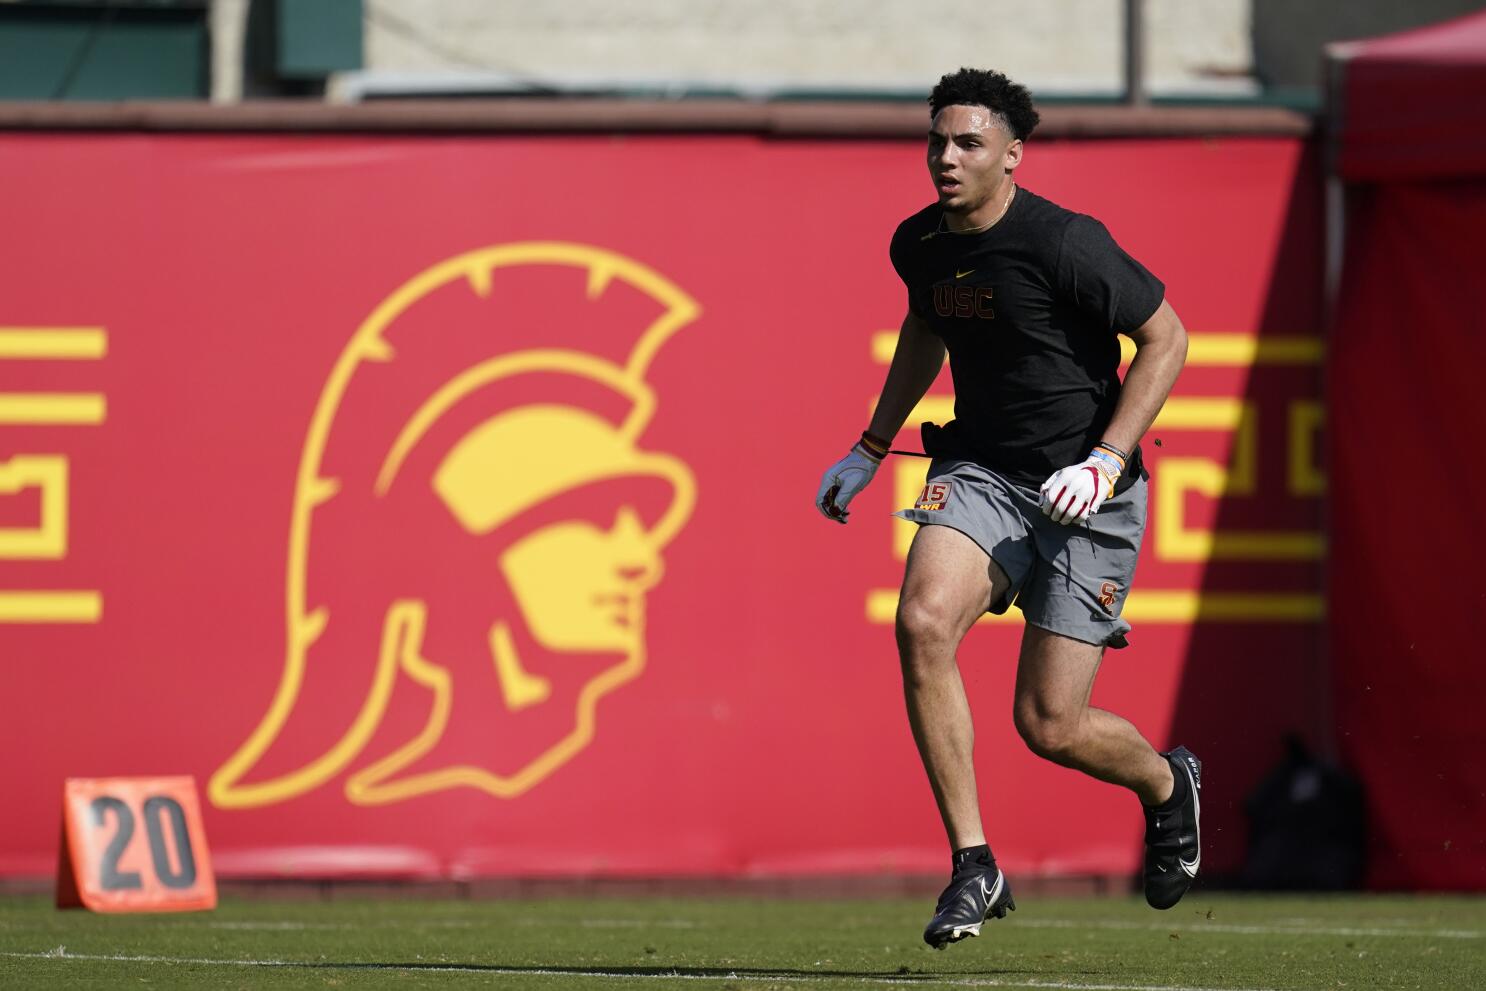 Drake London, USC's 6-4 receiver, will go fast in NFL draft - Los